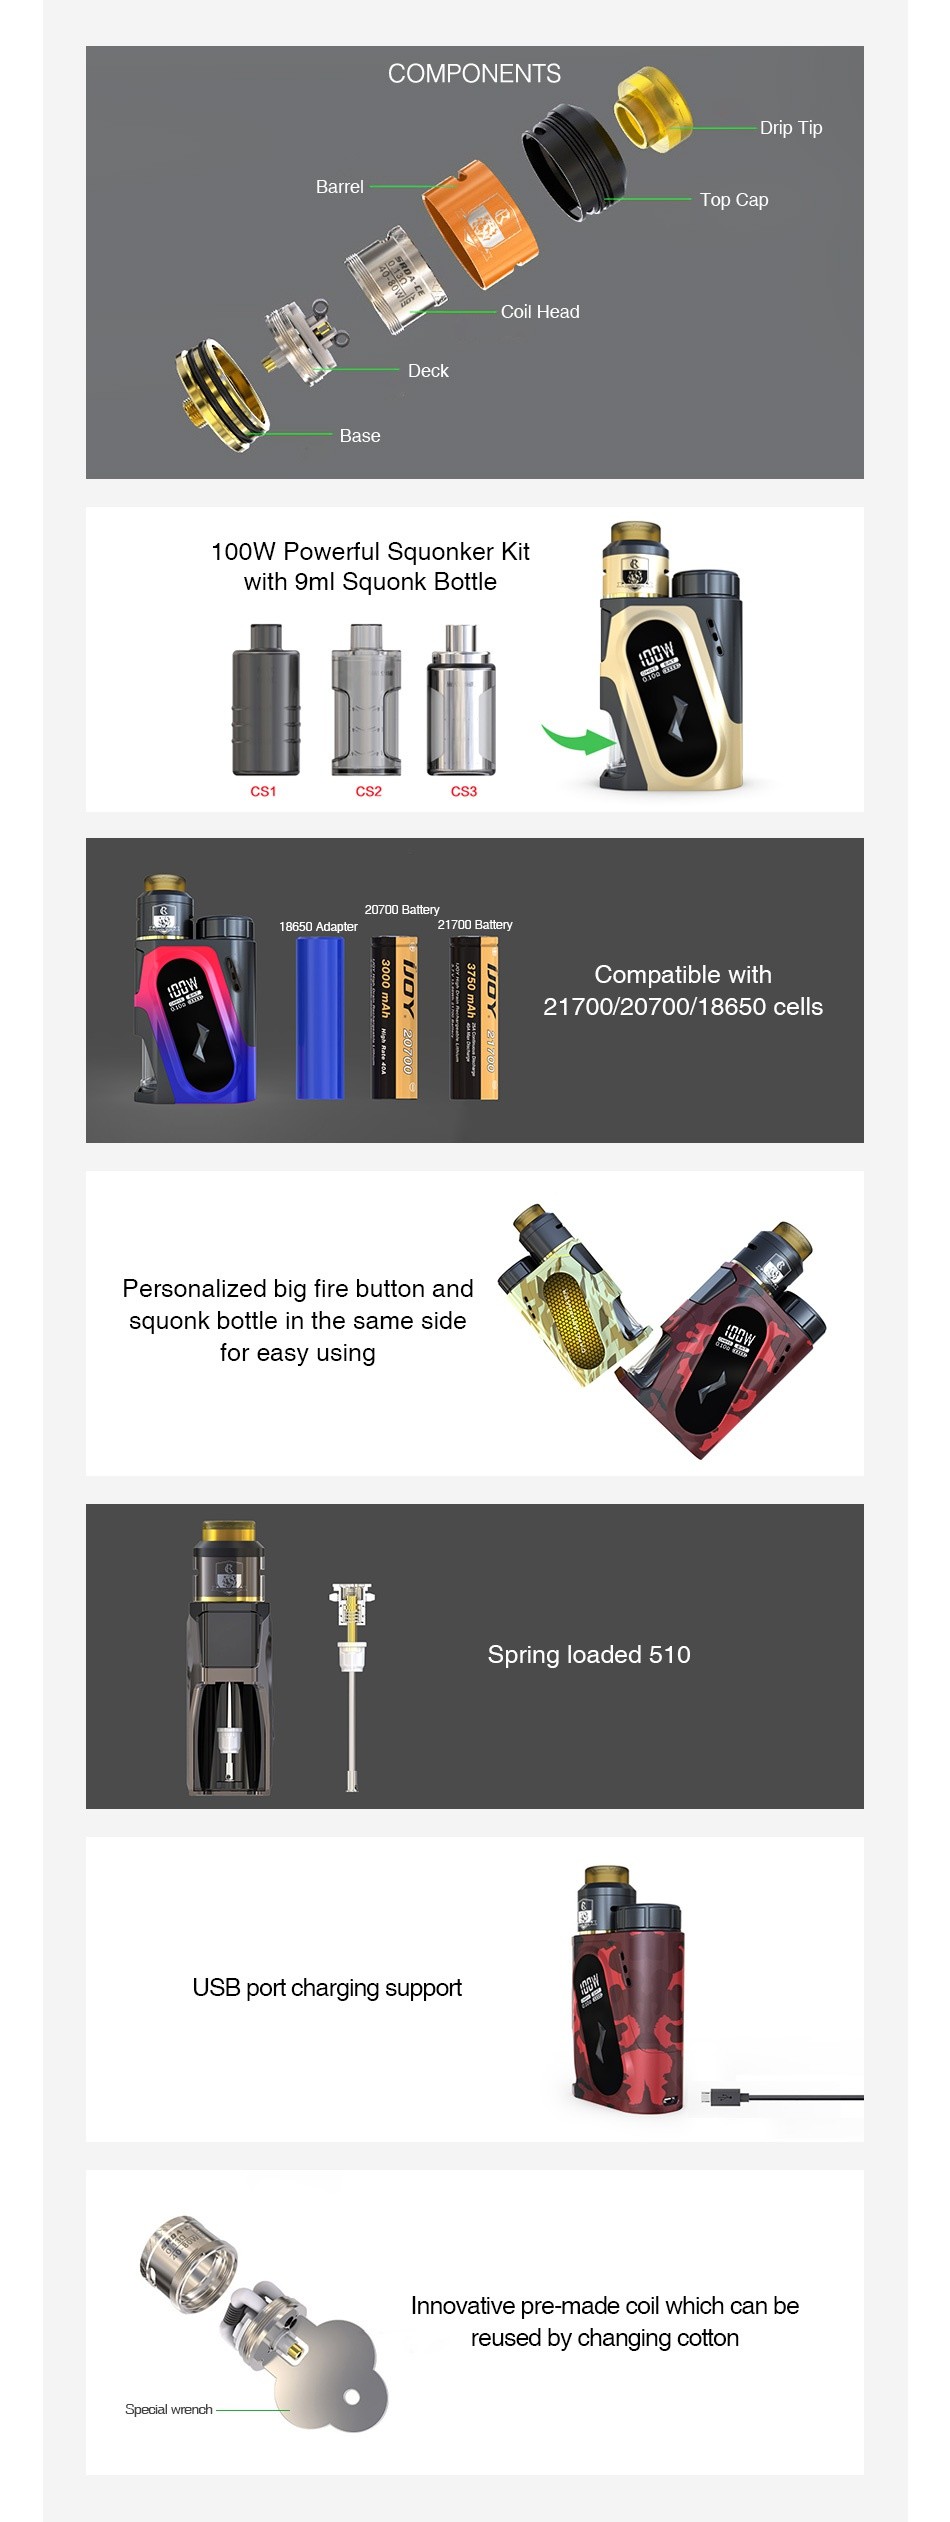 IJOY CAPO SRDA 100W 20700 Squonker Kit 3000mAh COMPONENTS op Cap Coil head 100W Powerful Squonker kit with gml Squonk Bottle Compatible with 21700 20700 18650cel Personalized big fire button and squonk bottle in the same side Spring loaded 510 USB port charging support Innovative pre made coil which can be eused by changing cotton Spooial ronon